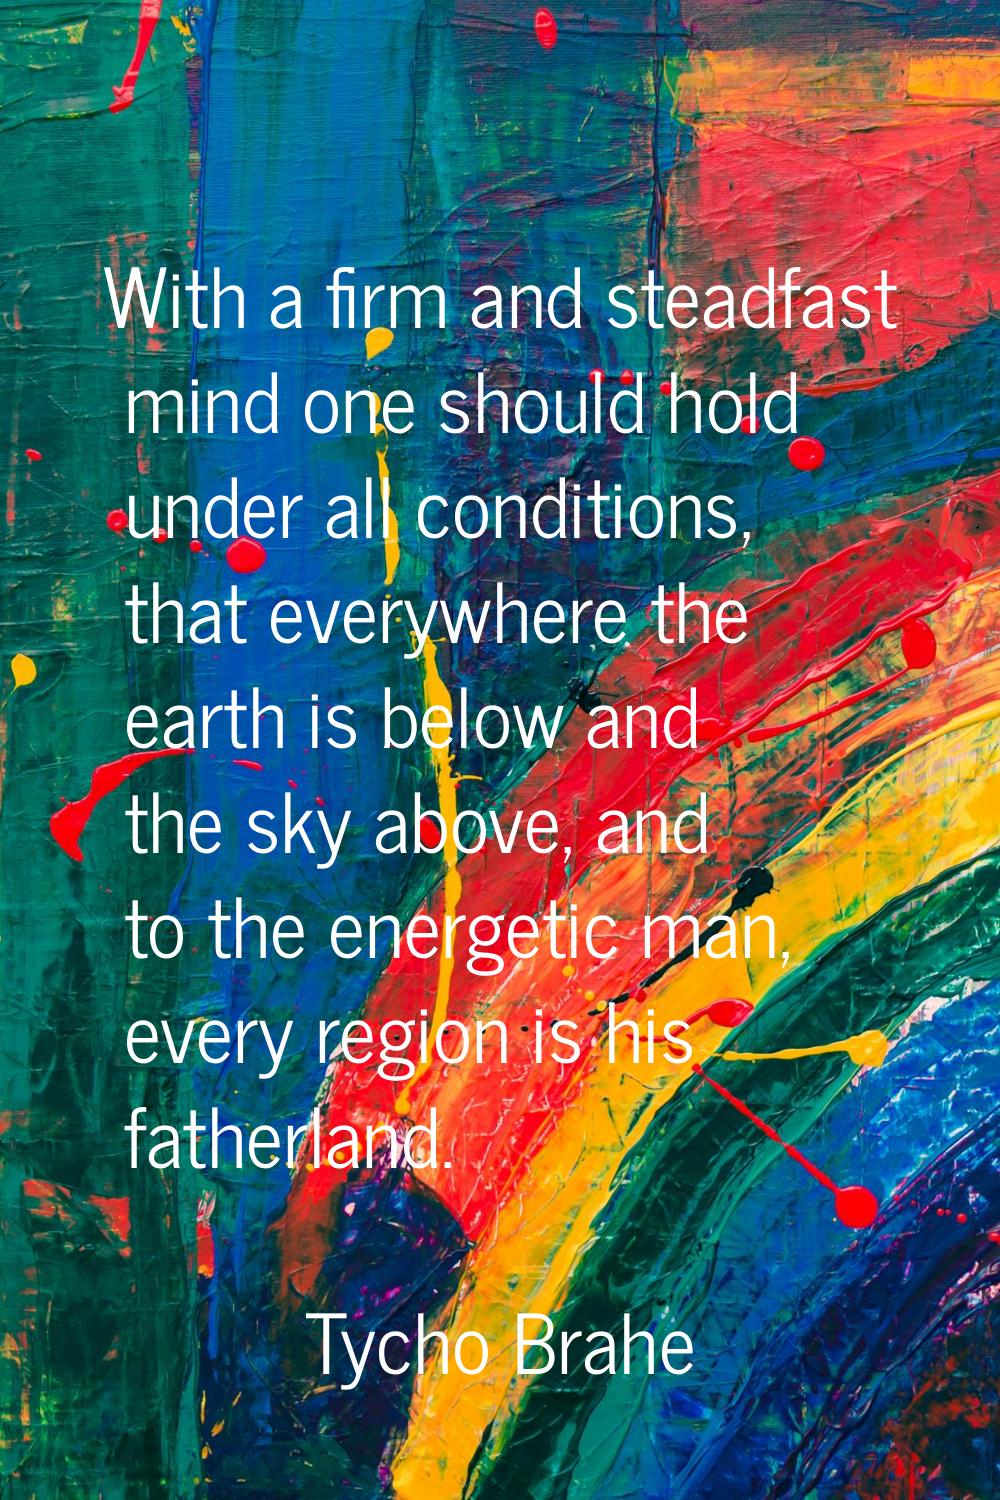 With a firm and steadfast mind one should hold under all conditions, that everywhere the earth is b